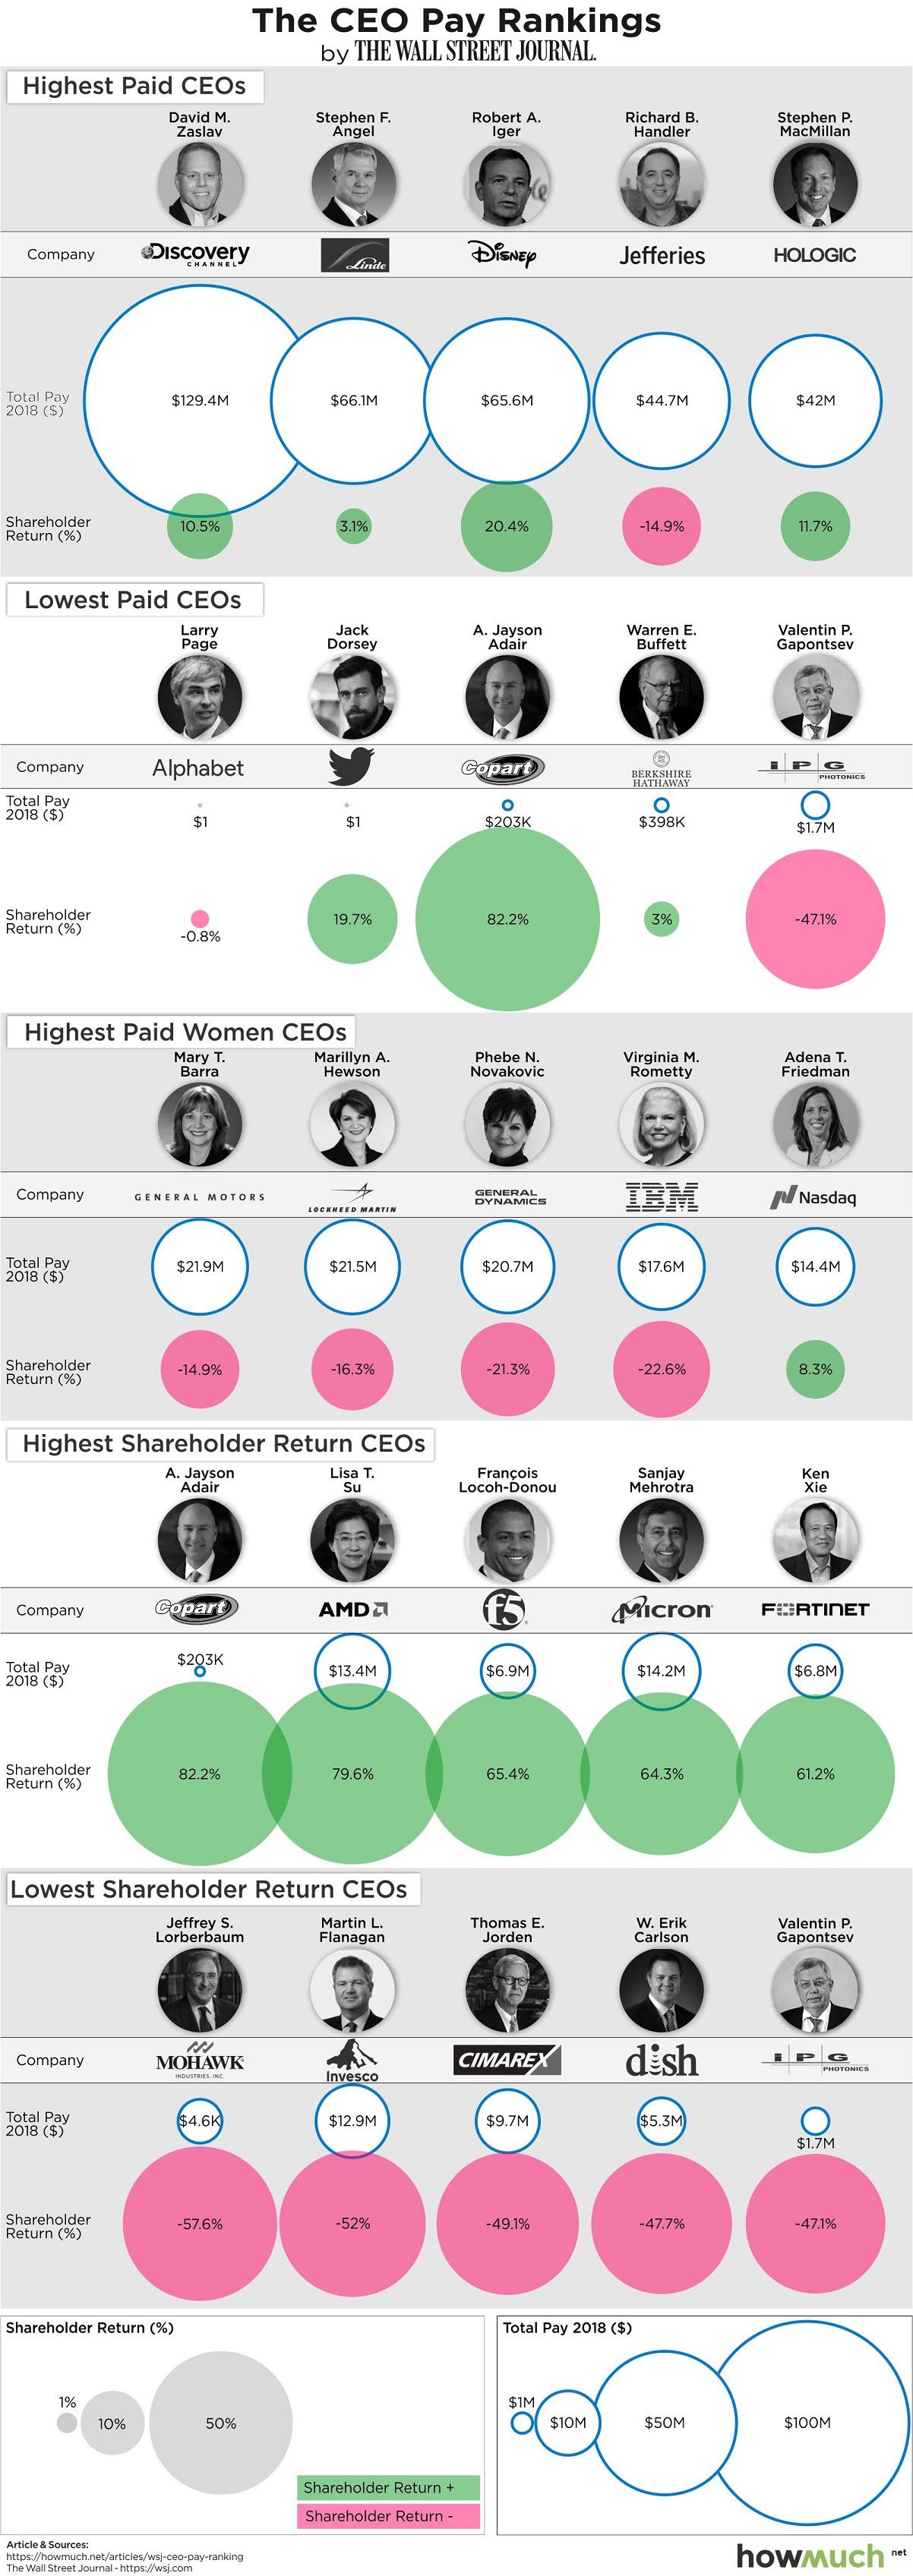 Visualizing the Highest & Lowest Paid S&P 500 CEOs in 2018 #infographic